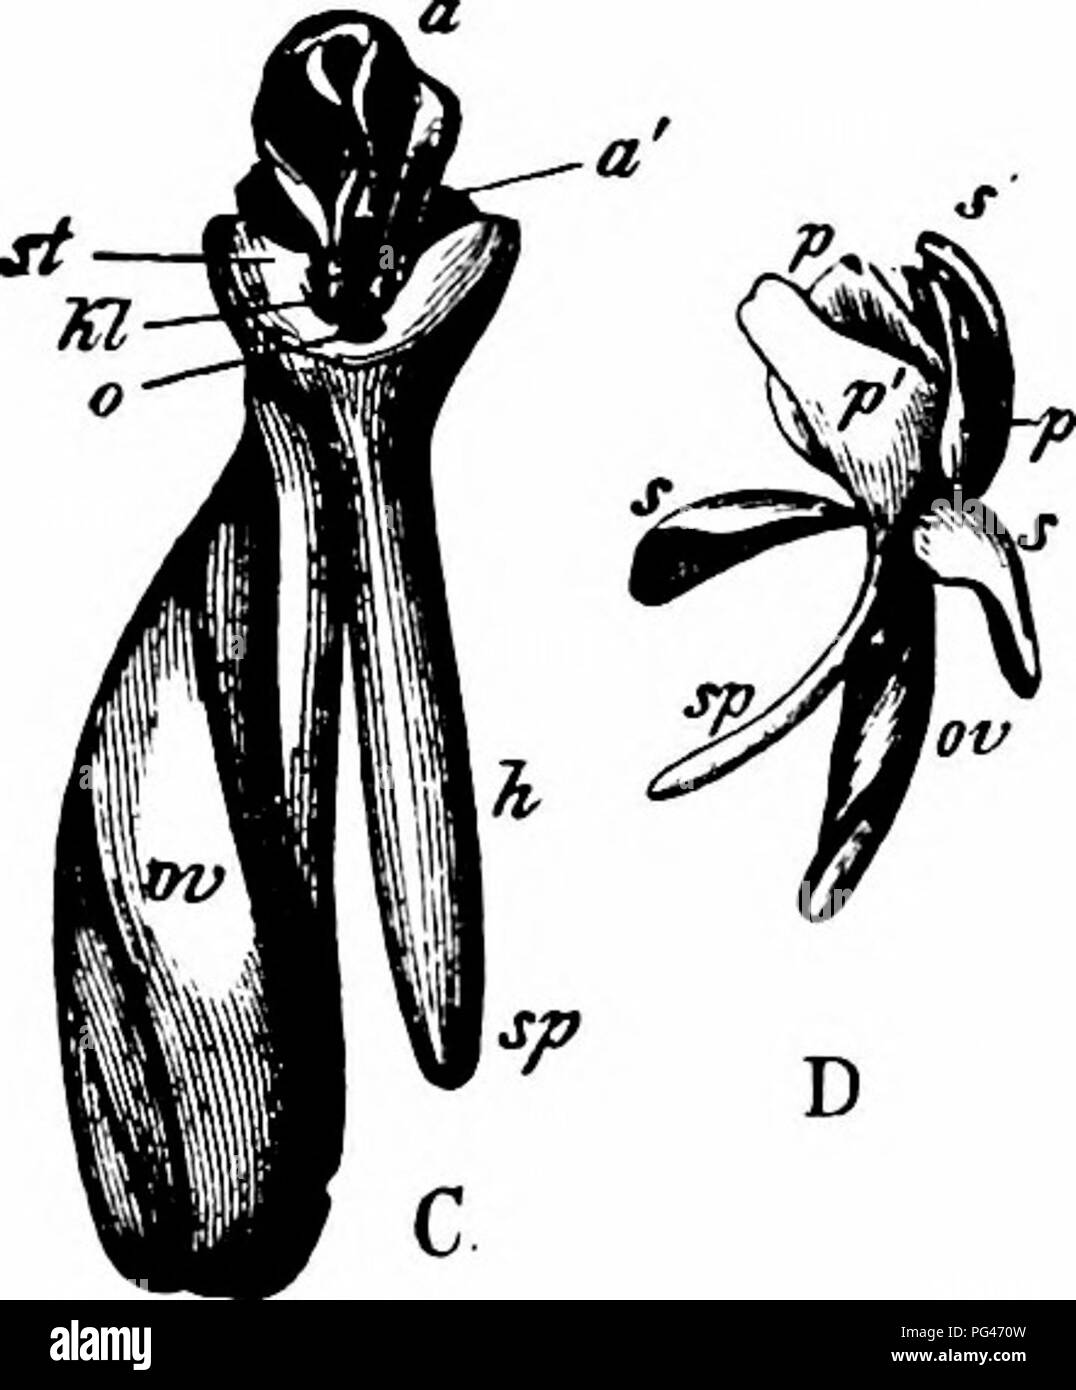 Handbook Of Flower Pollination Based Upon Hermann Mu Ller S Work The Fertilisation Of Flowers By Insects Fertilization Of Plants Fig 367 Habenaria Conopsea Benth After Herm Miiller A Flower Seen